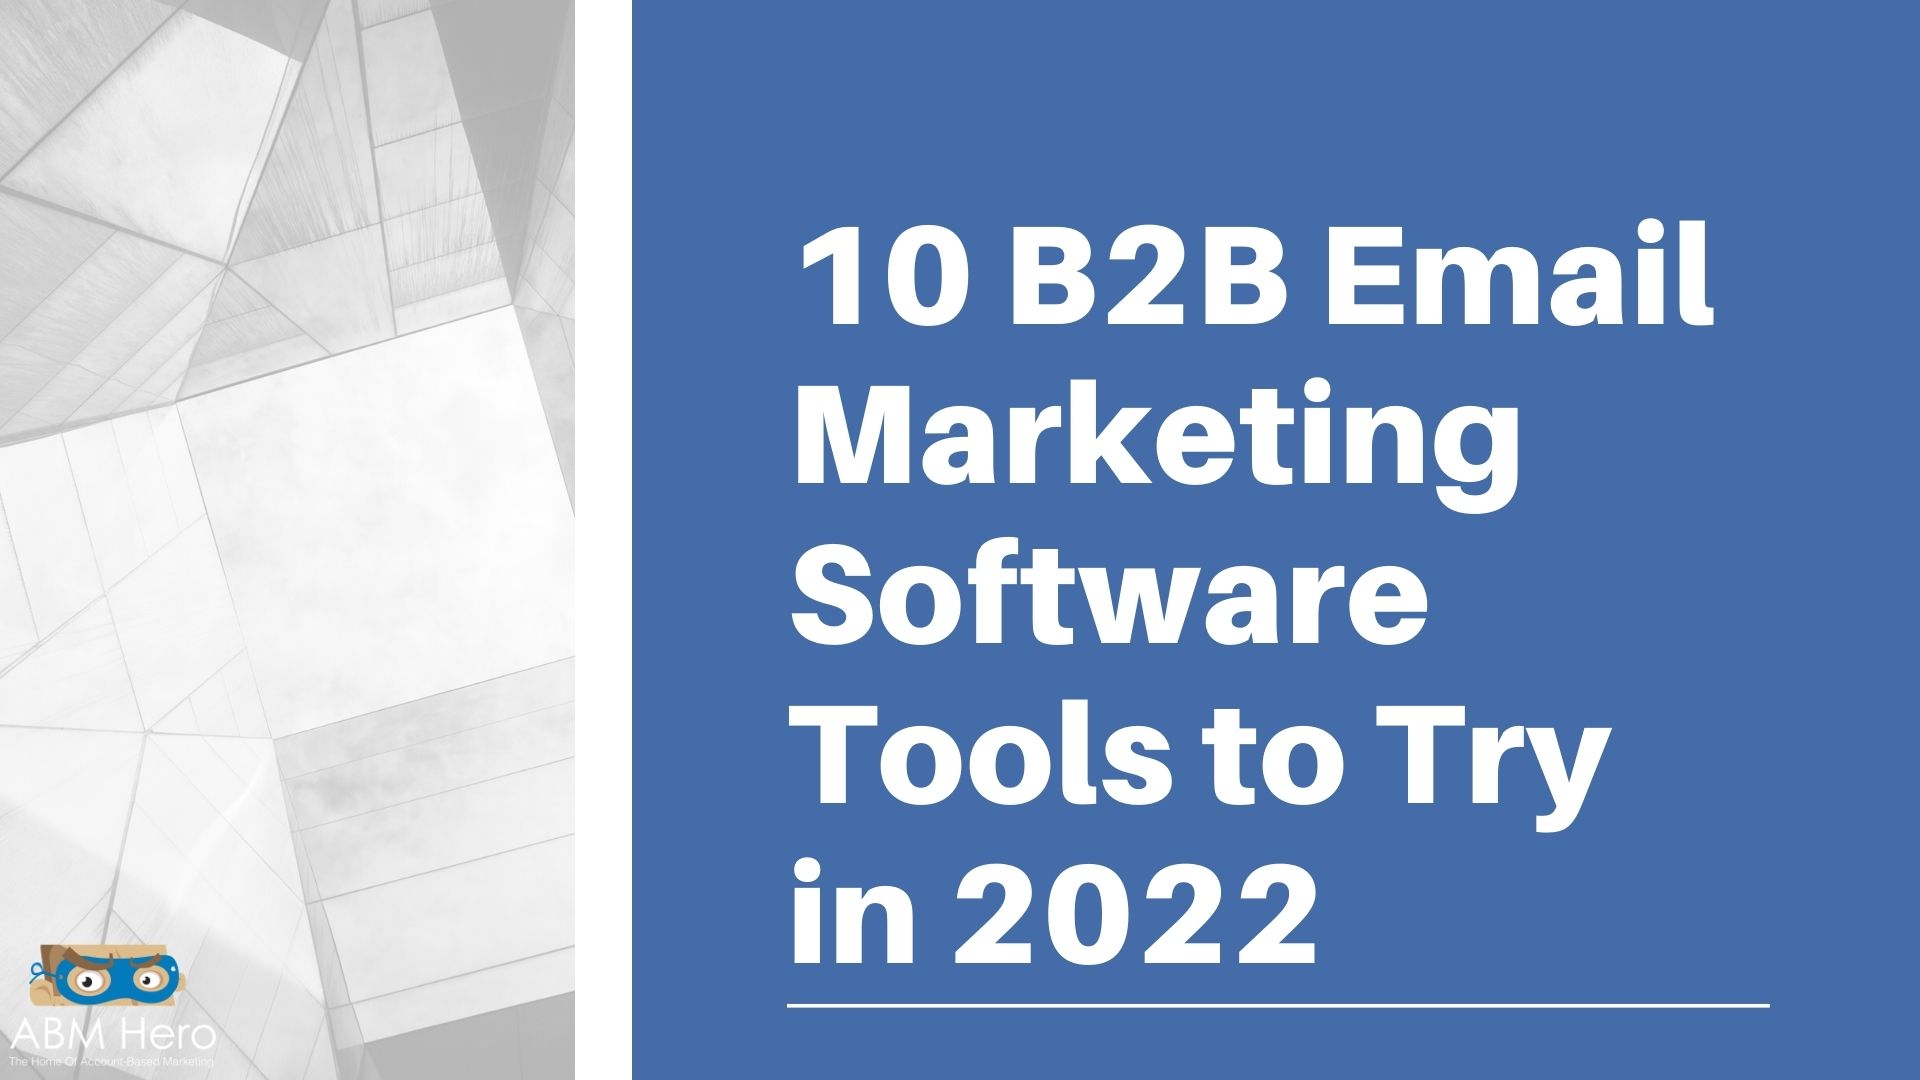 You are currently viewing 10 B2B Email Marketing Software Tools to Try in 2022